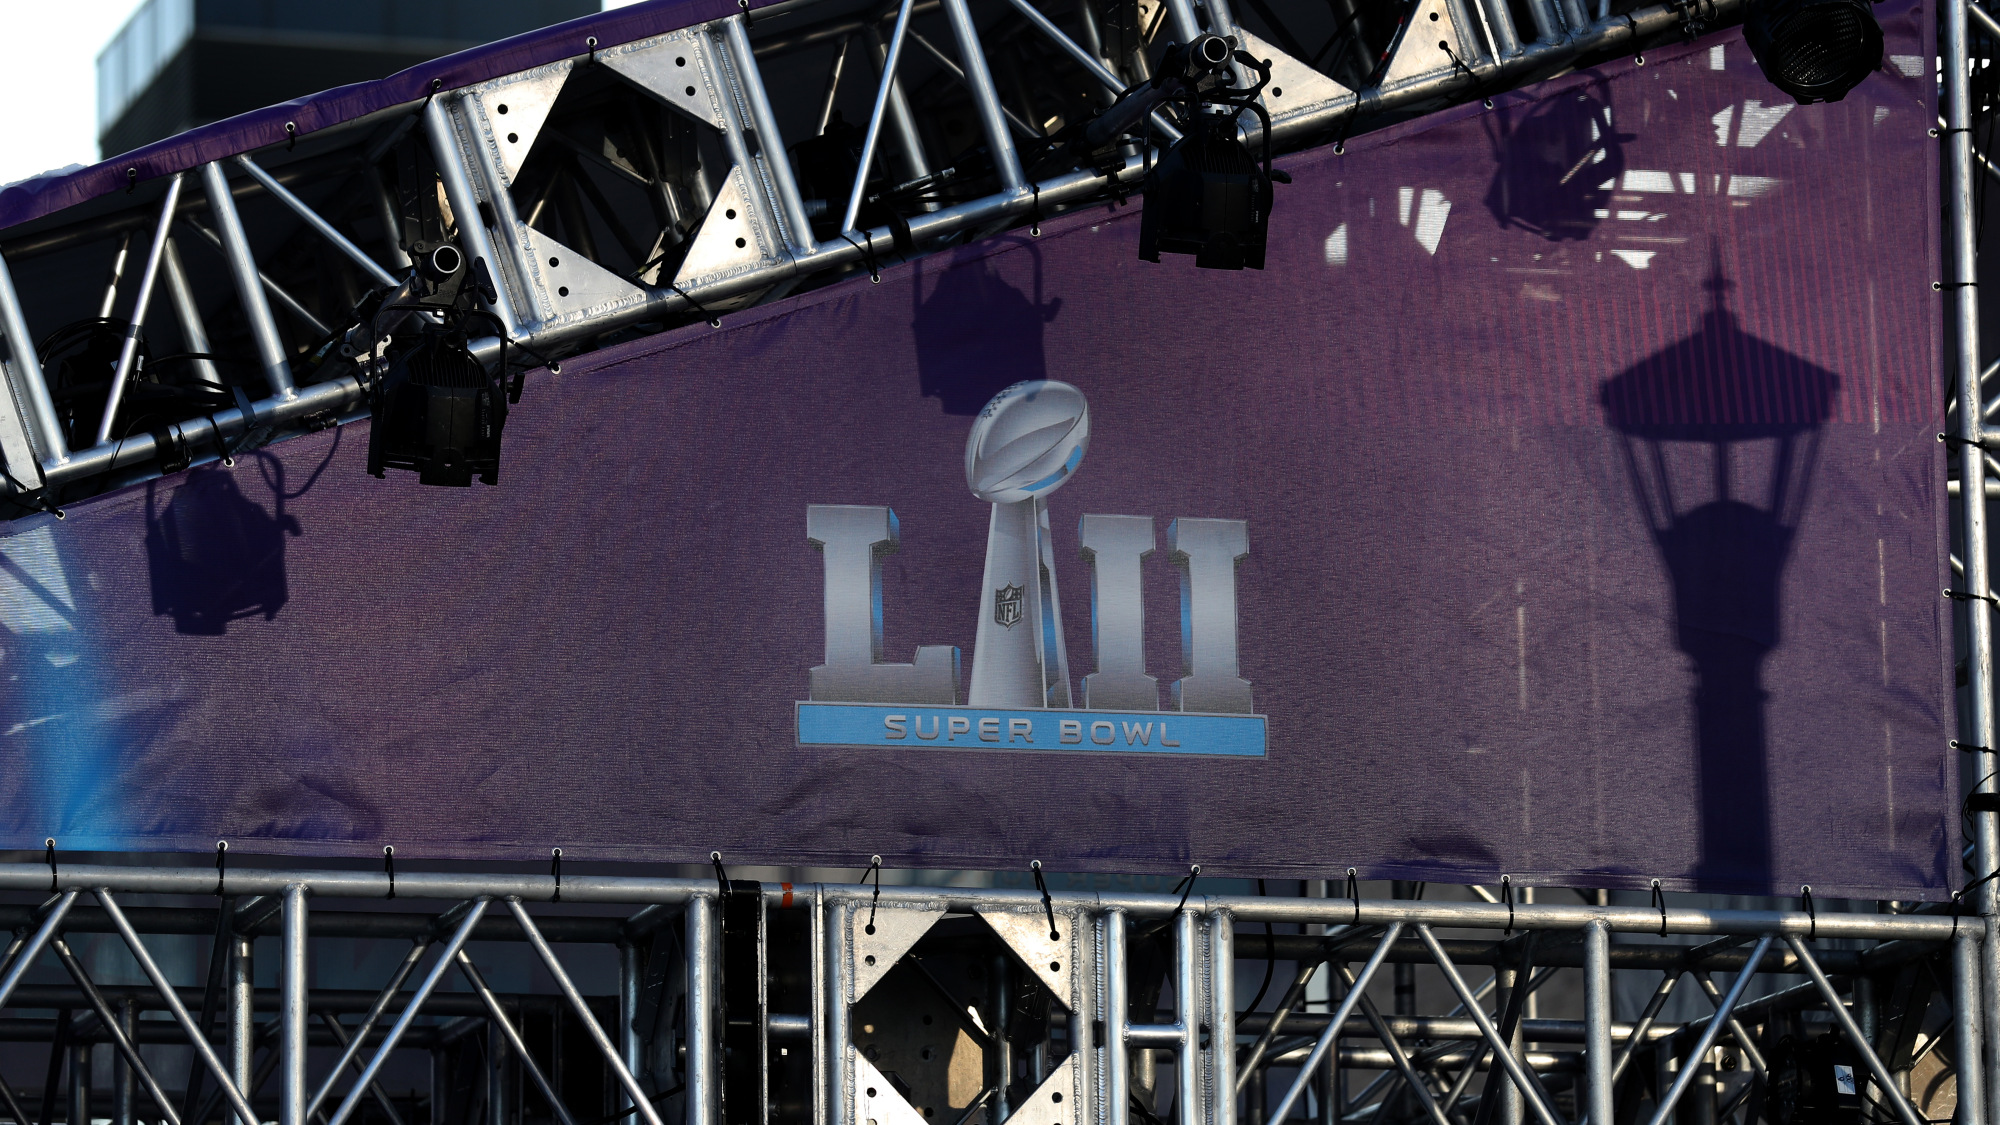 Get-In Price for Super Bowl Tickets Plunges 30%